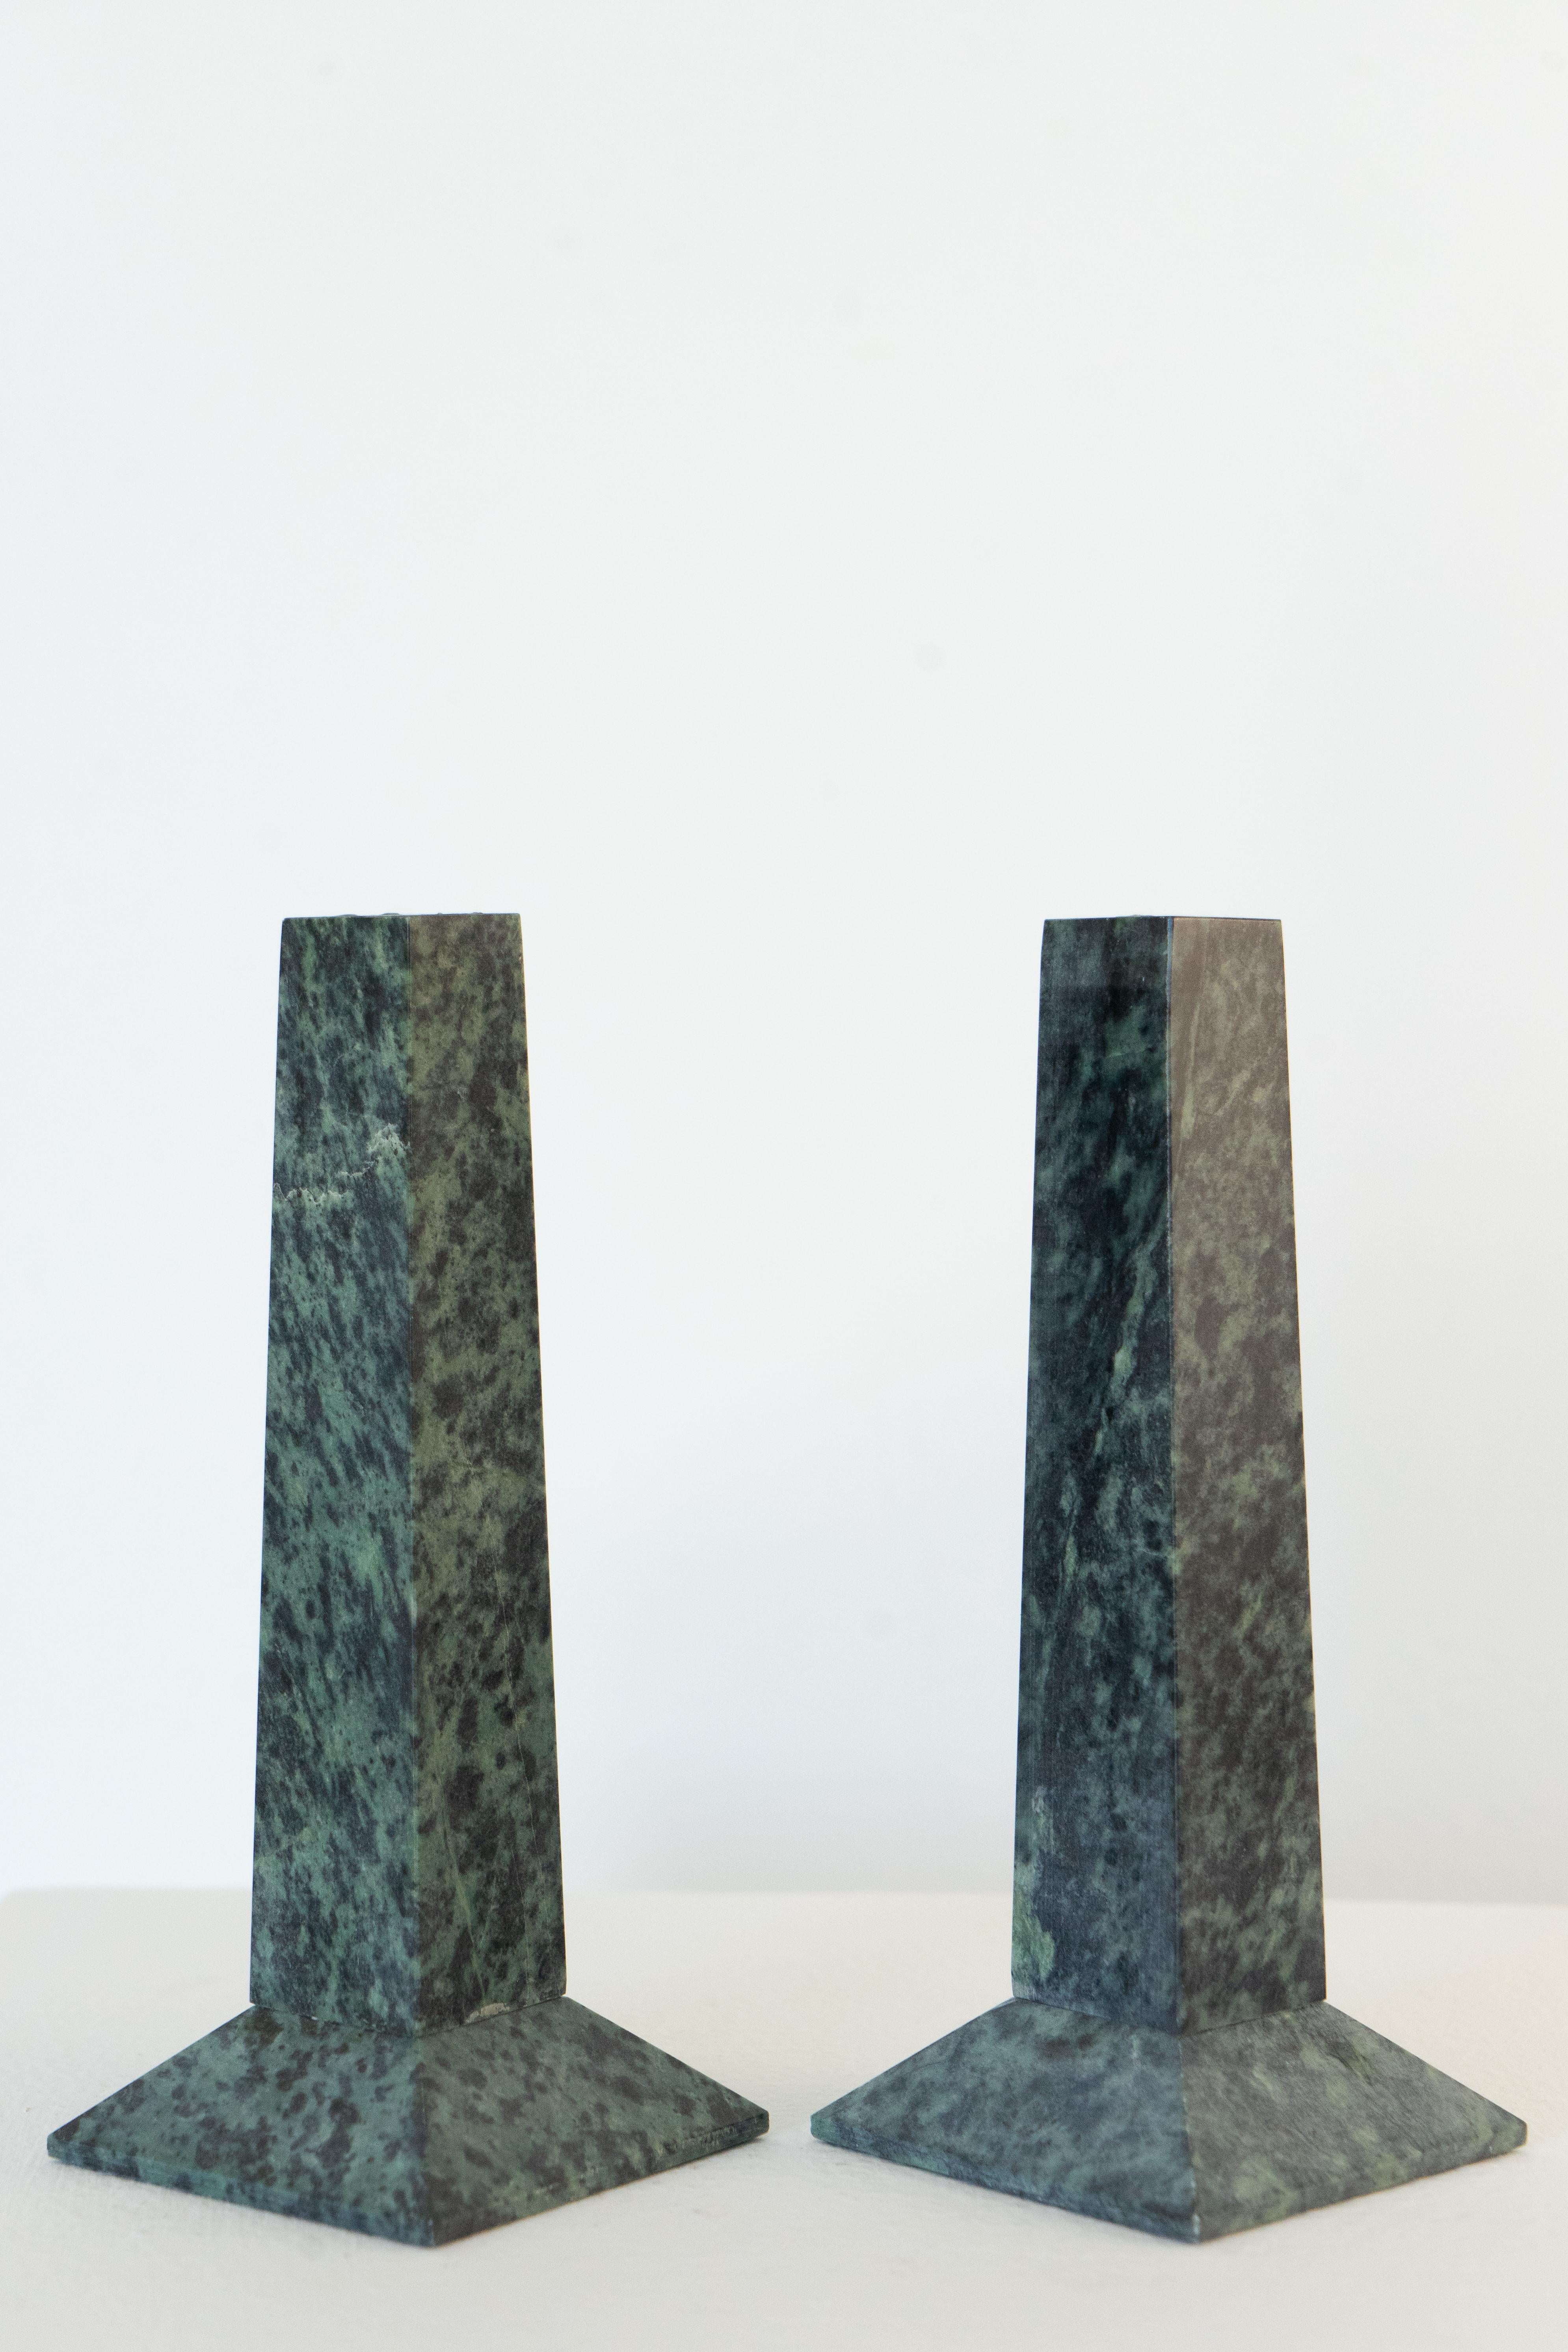 20th Century Italian Green Marble Architectural Candle Holders Circa 1980s For Sale